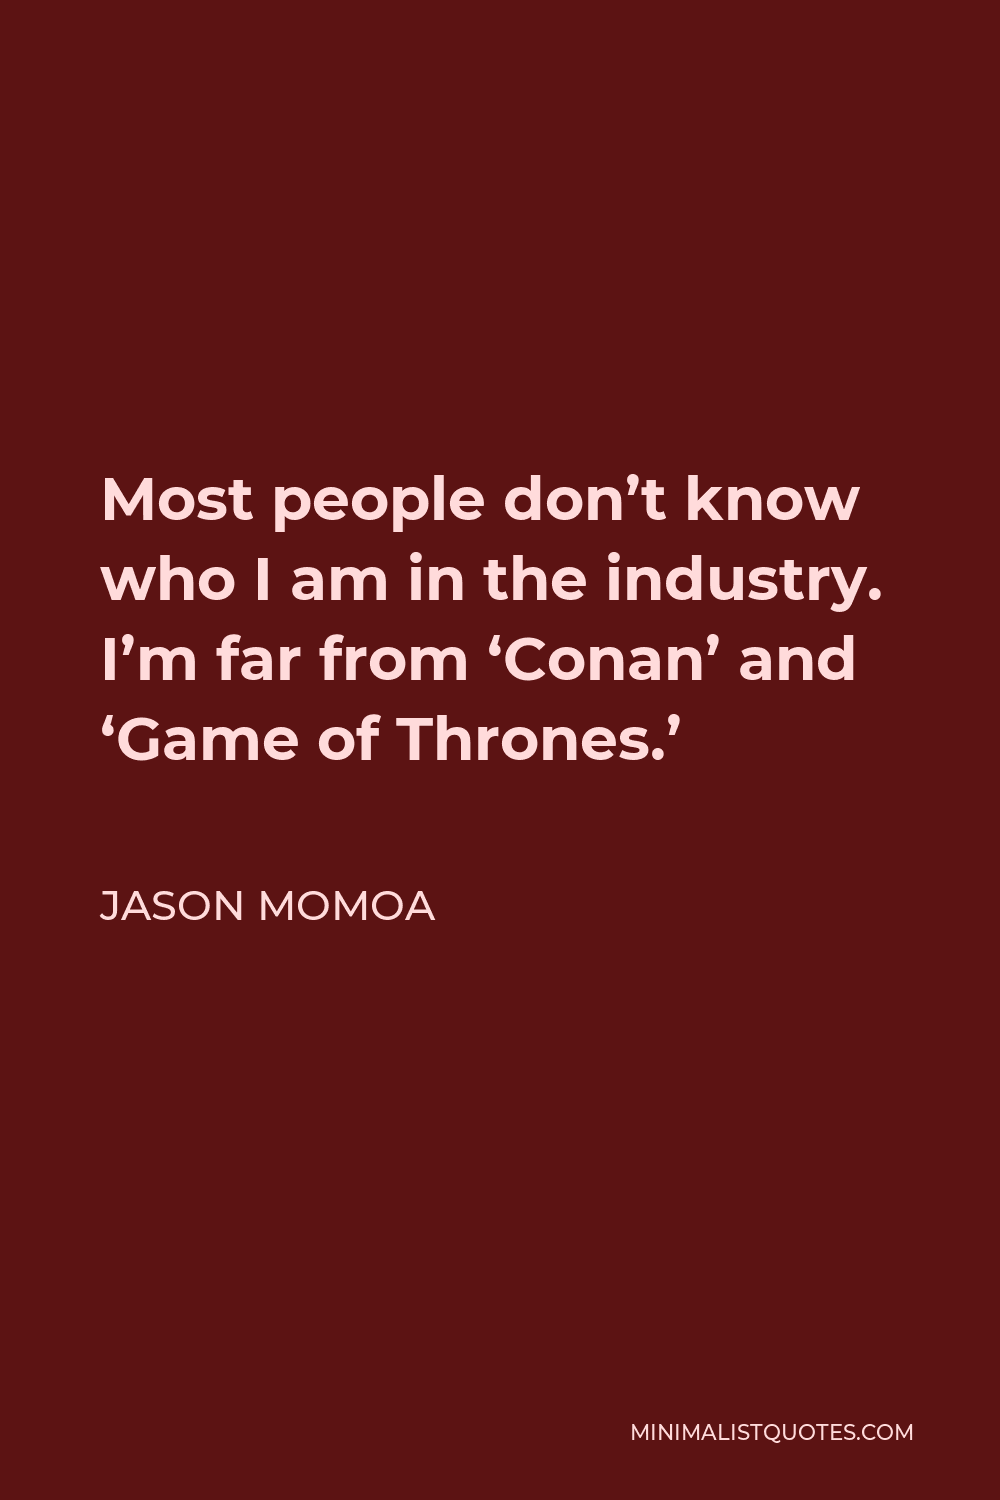 Jason Momoa Quote - Most people don’t know who I am in the industry. I’m far from ‘Conan’ and ‘Game of Thrones.’